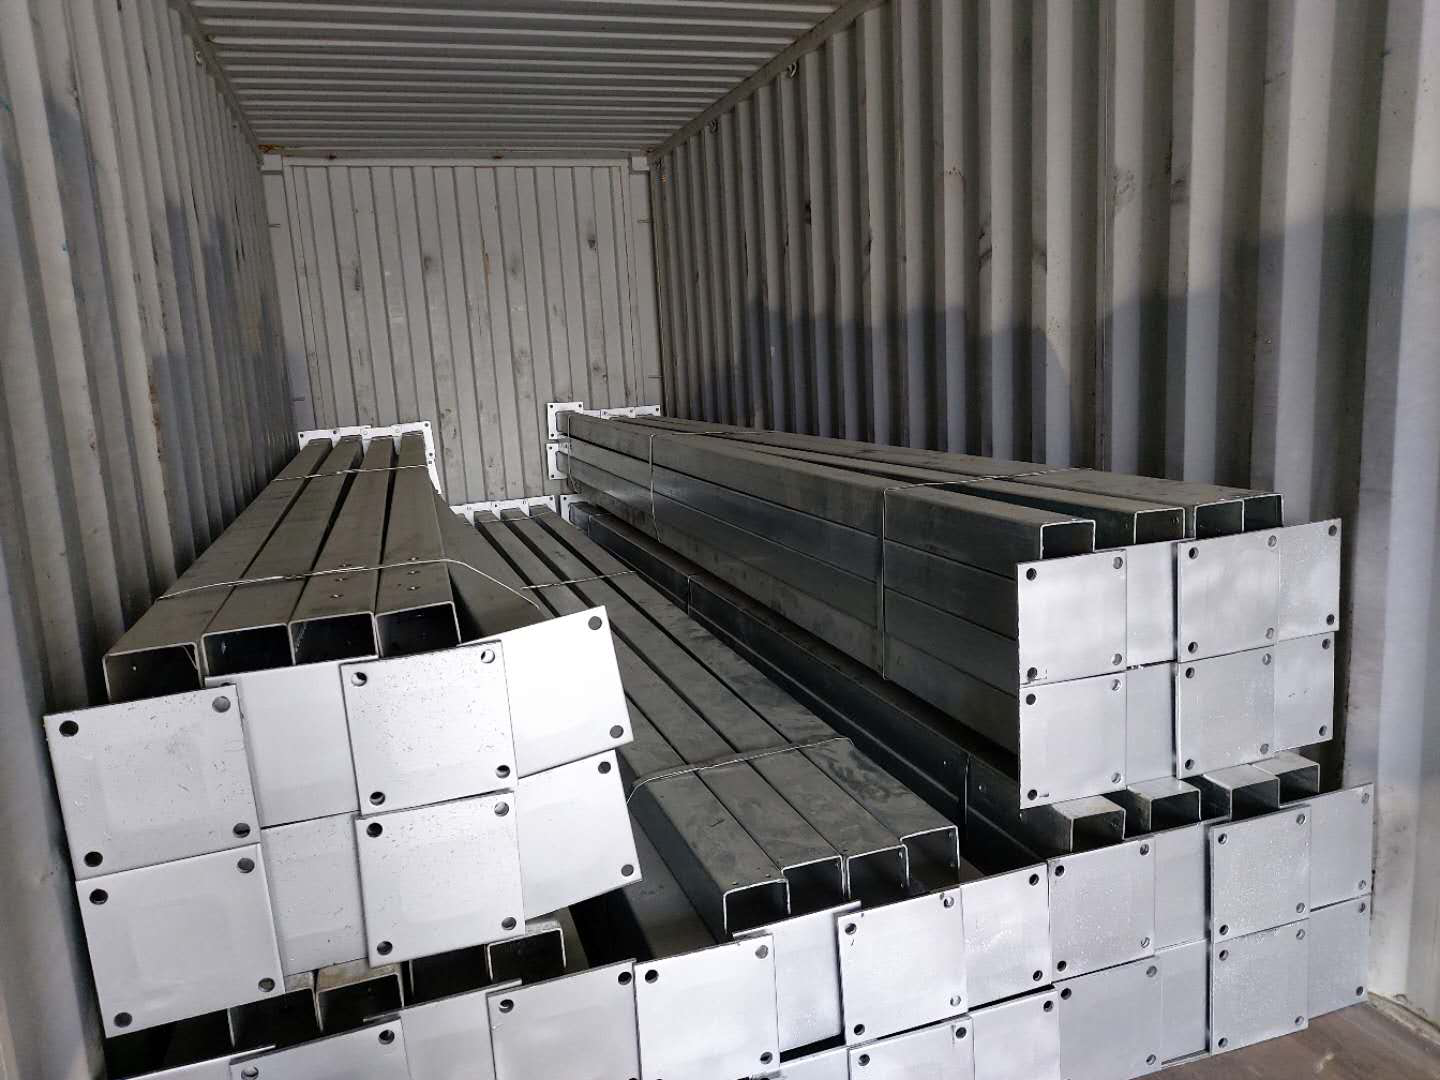 Polycarbonate greenhouse to be shipped to AE